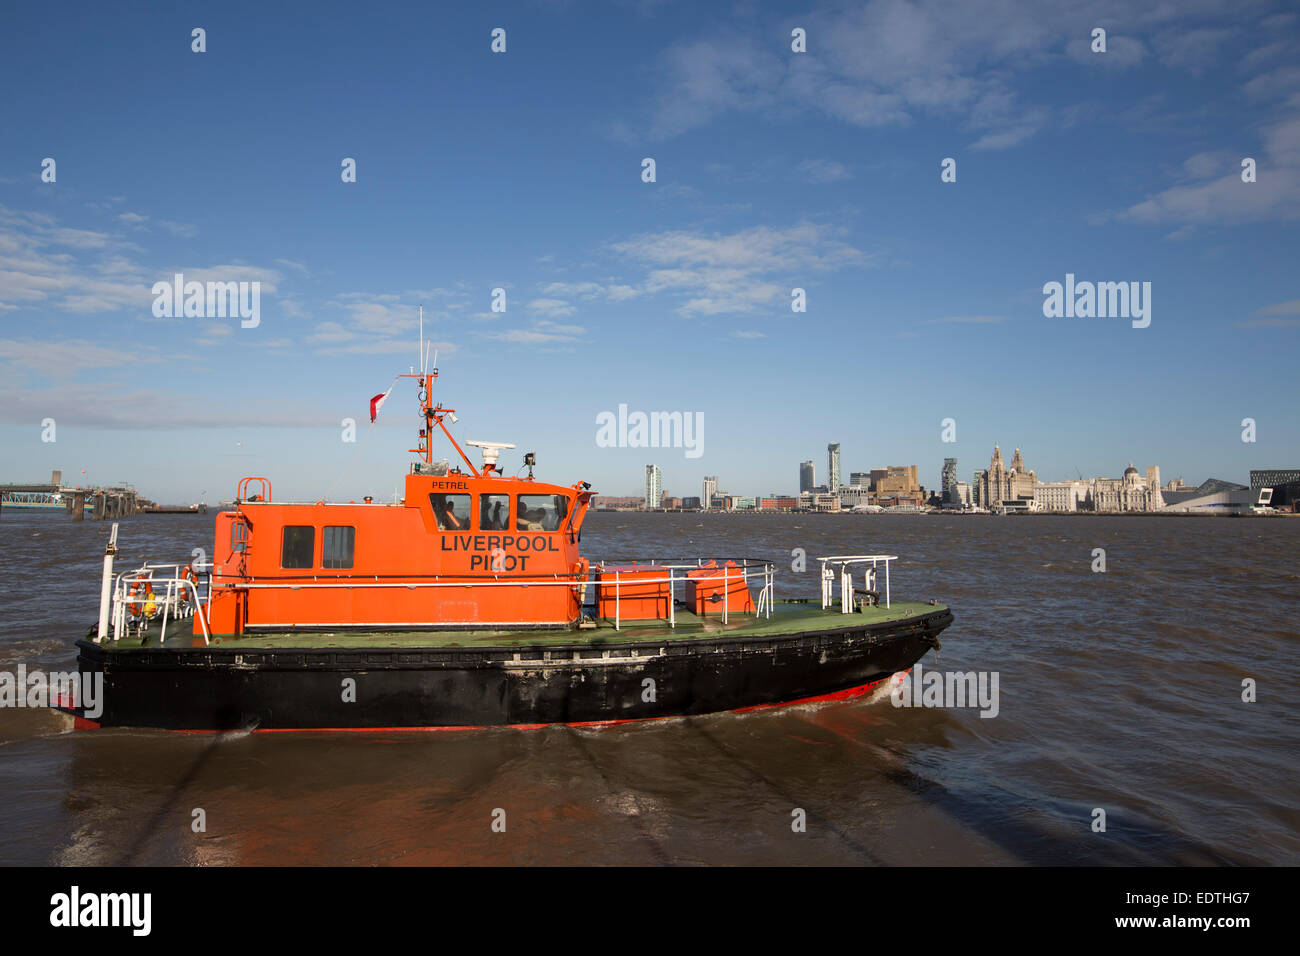 A pilot launch belonging to Liverpool Pilot Services Ltd at Woodside, Birkenhead, Wirral. Stock Photo